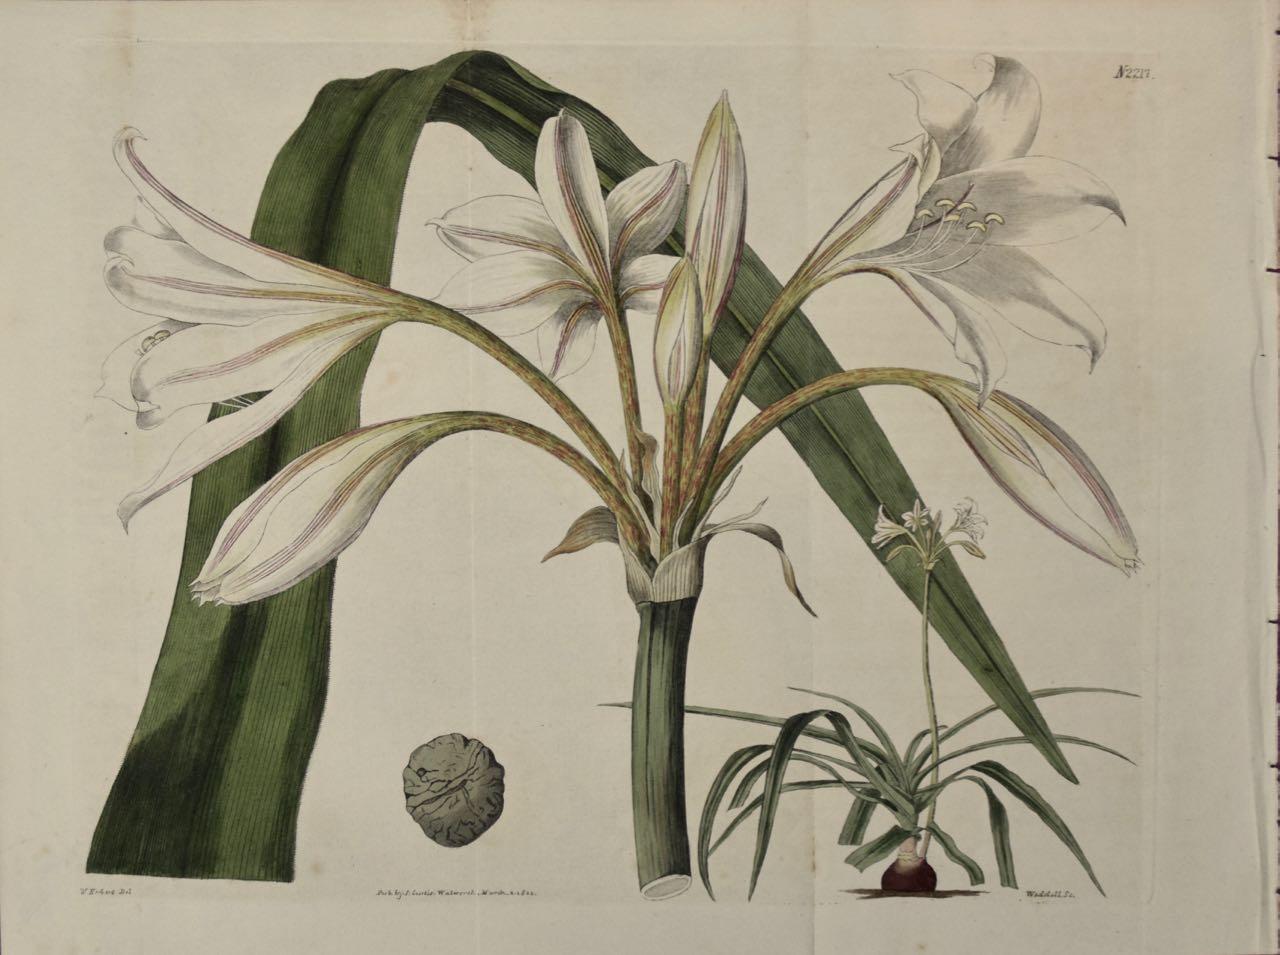 William Curtis Landscape Print - Flowering Crinum Plant: A 19th Century Hand-colored Engraving by Curtis